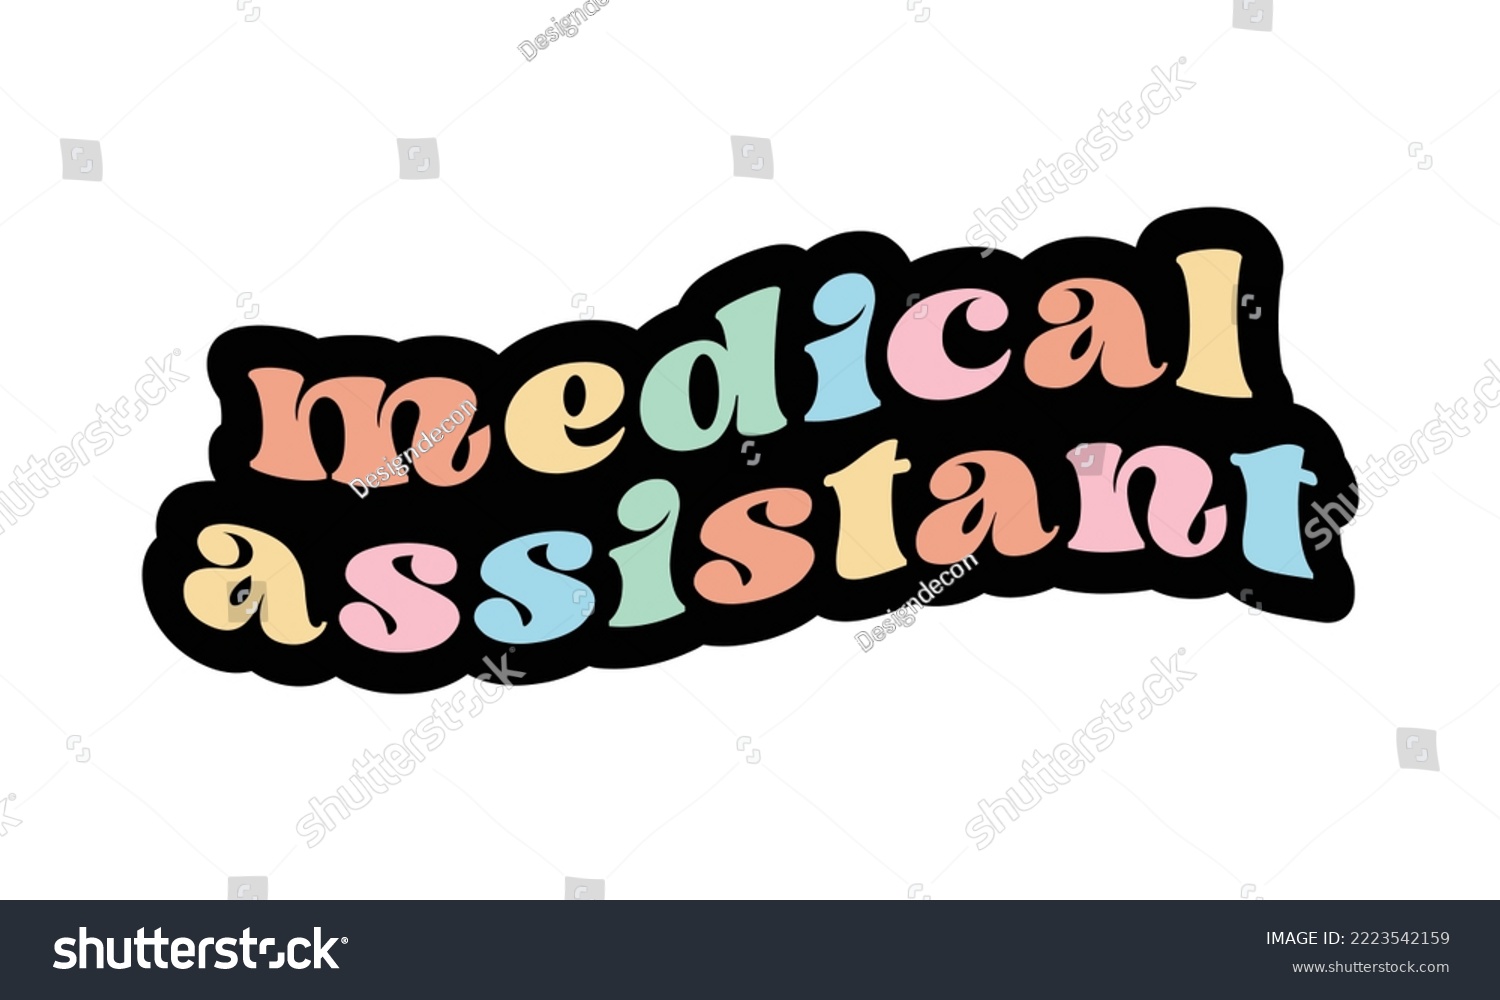 SVG of Medical Assistant Career quote retro groovy typography sublimation sticker SVG on white background svg